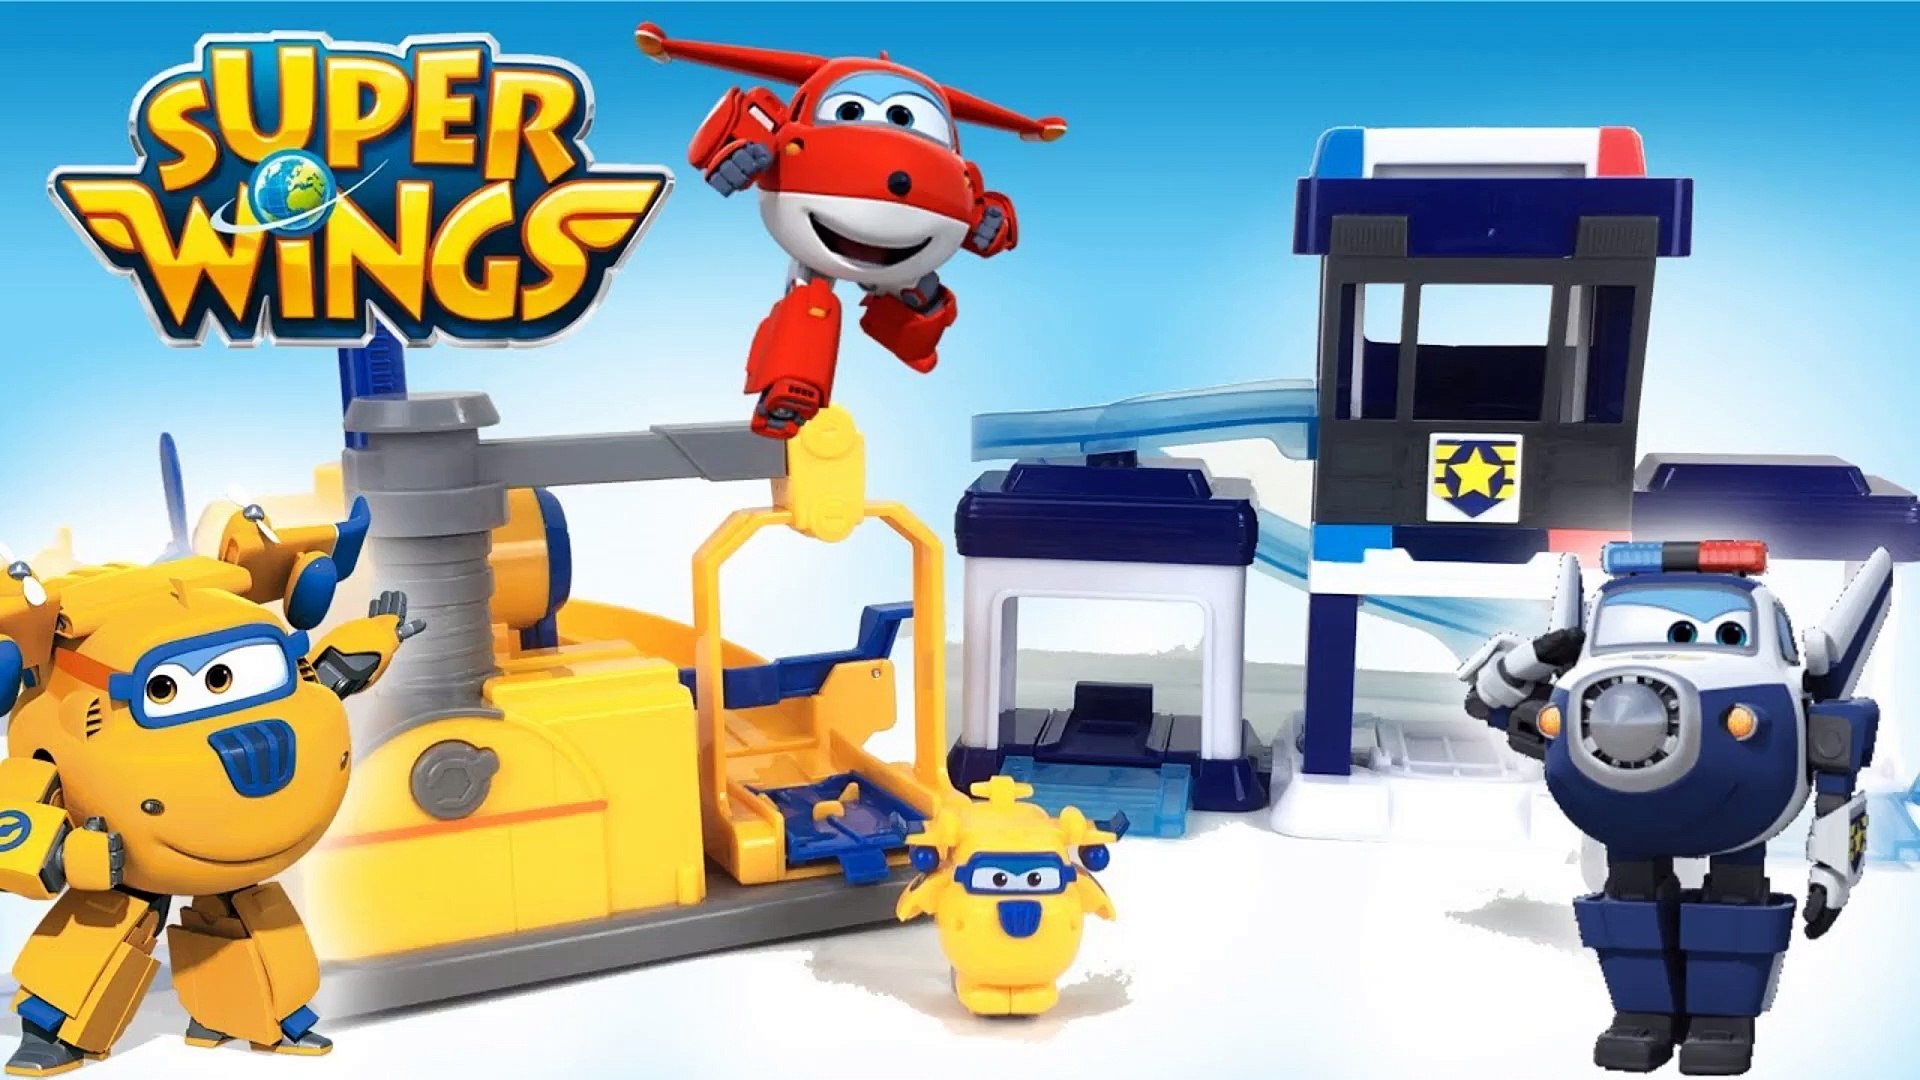 Super Wings Toys : Paul's Police Station & Donnie's Fix-It Garage 출동슈퍼윙스 -  video Dailymotion